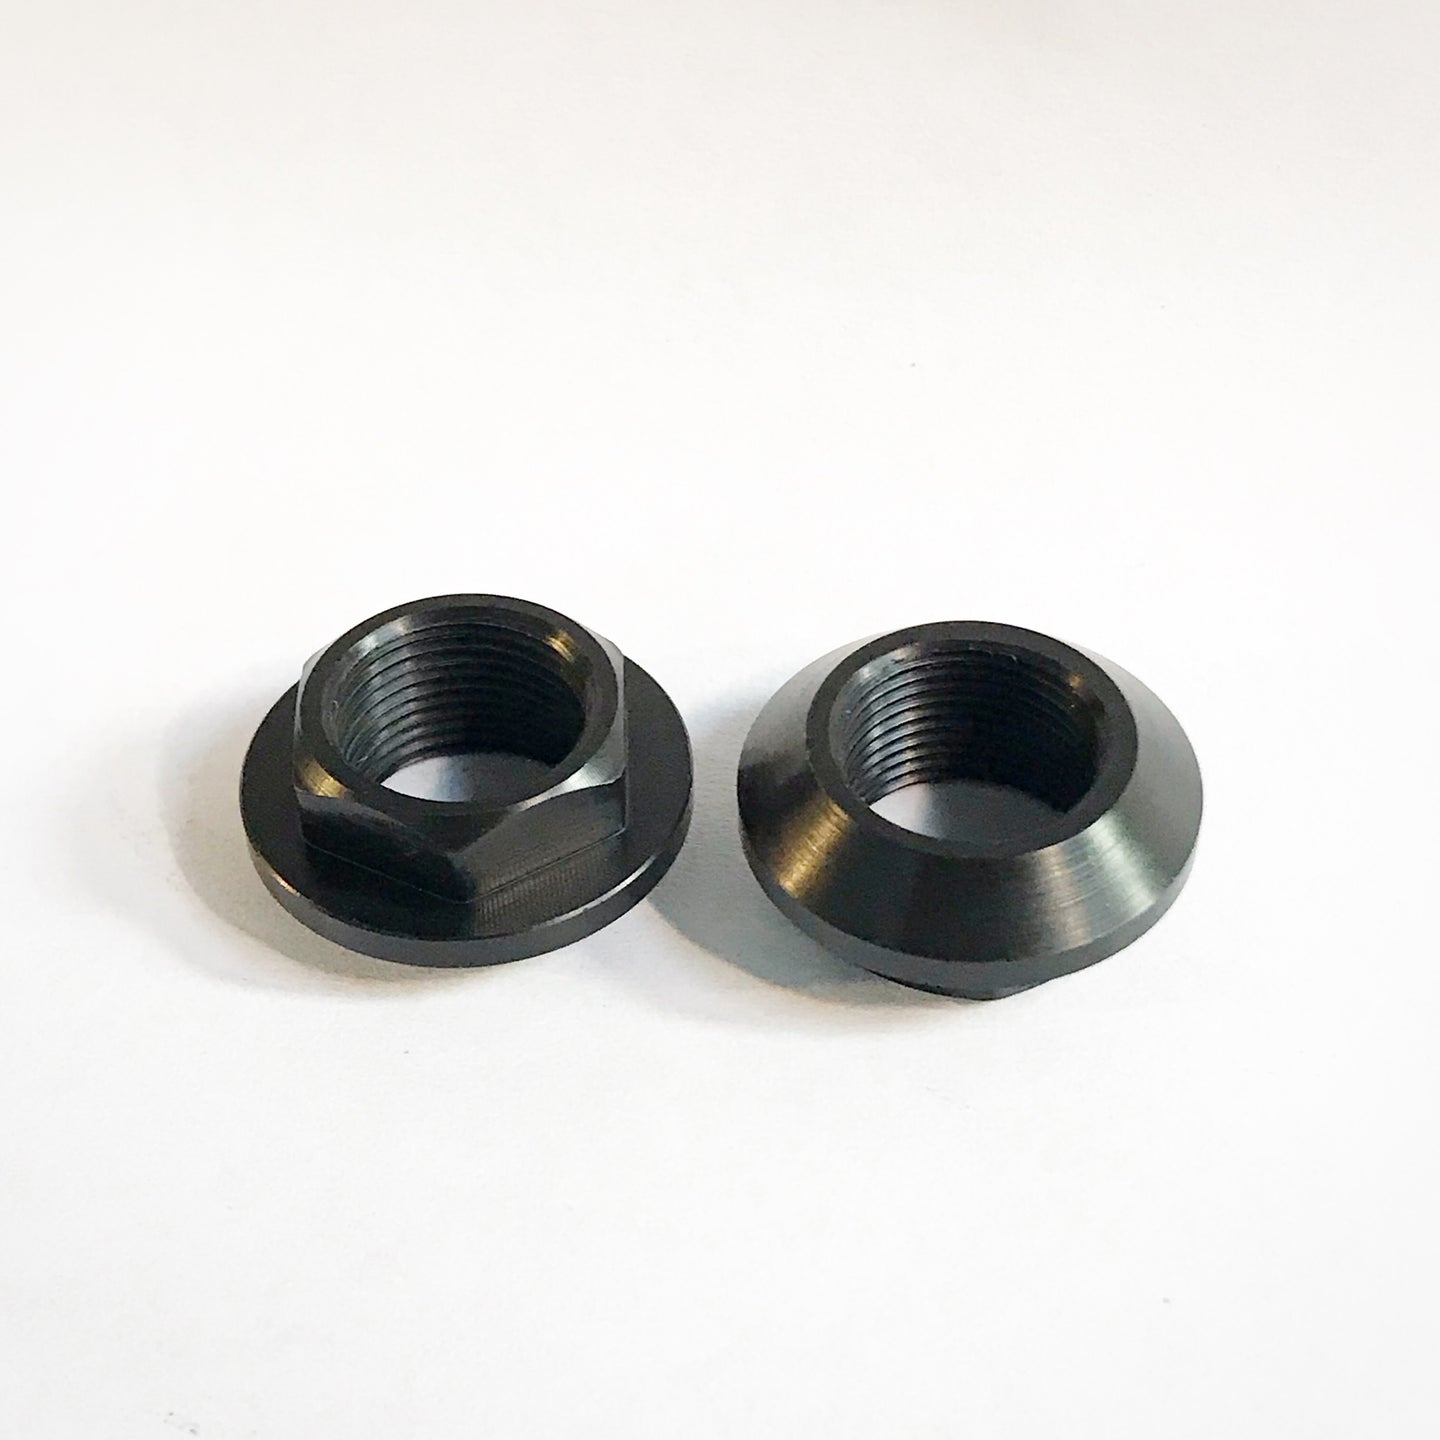 AE86 delrin headlight/wiper switch nuts pair